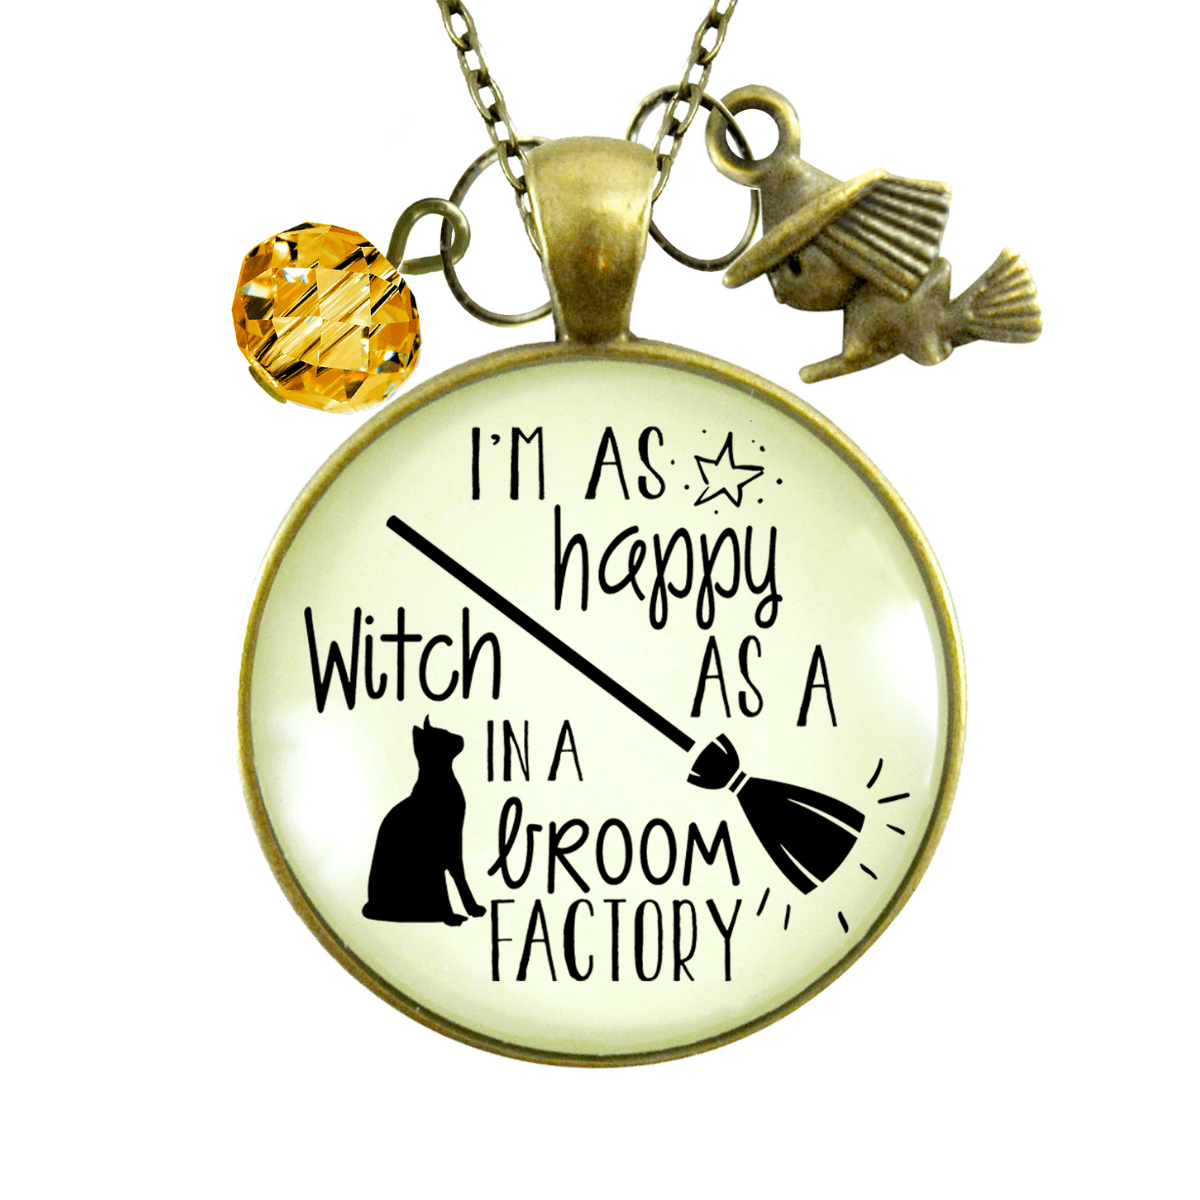 Gutsy Goodness Halloween Necklace I'm Happy Witch Broom Factory Funny Autumn Jewelry - Gutsy Goodness;Halloween Necklace I'm Happy Witch Broom Factory Funny Autumn Jewelry - Gutsy Goodness Handmade Jewelry Gifts